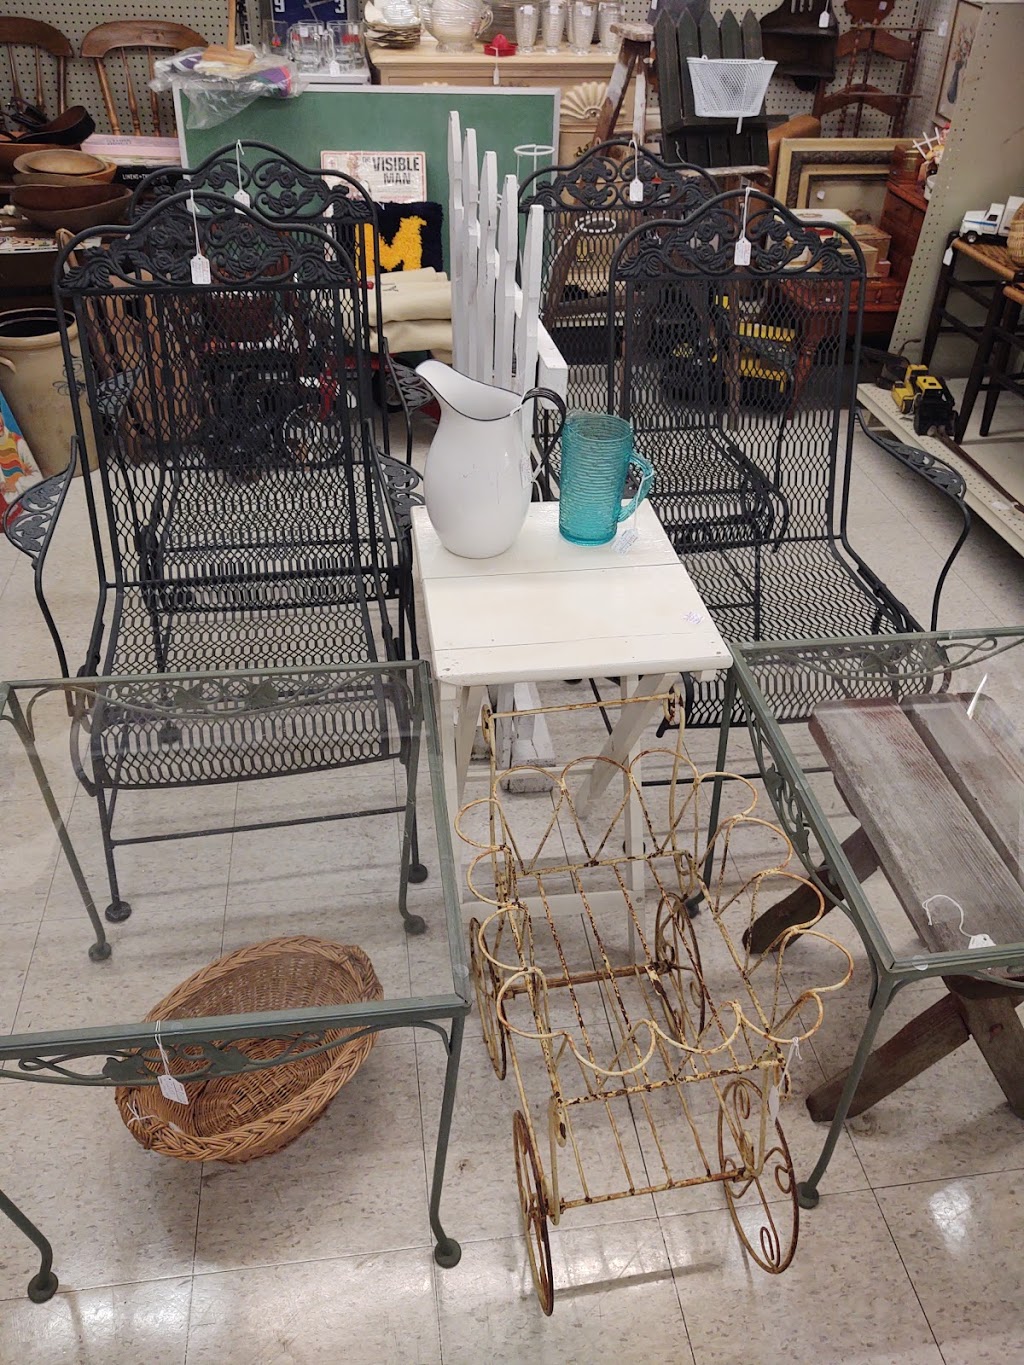 Maumee Antique Mall | 1552 S Reynolds Rd, Maumee, OH 43537 | Phone: (419) 893-2468